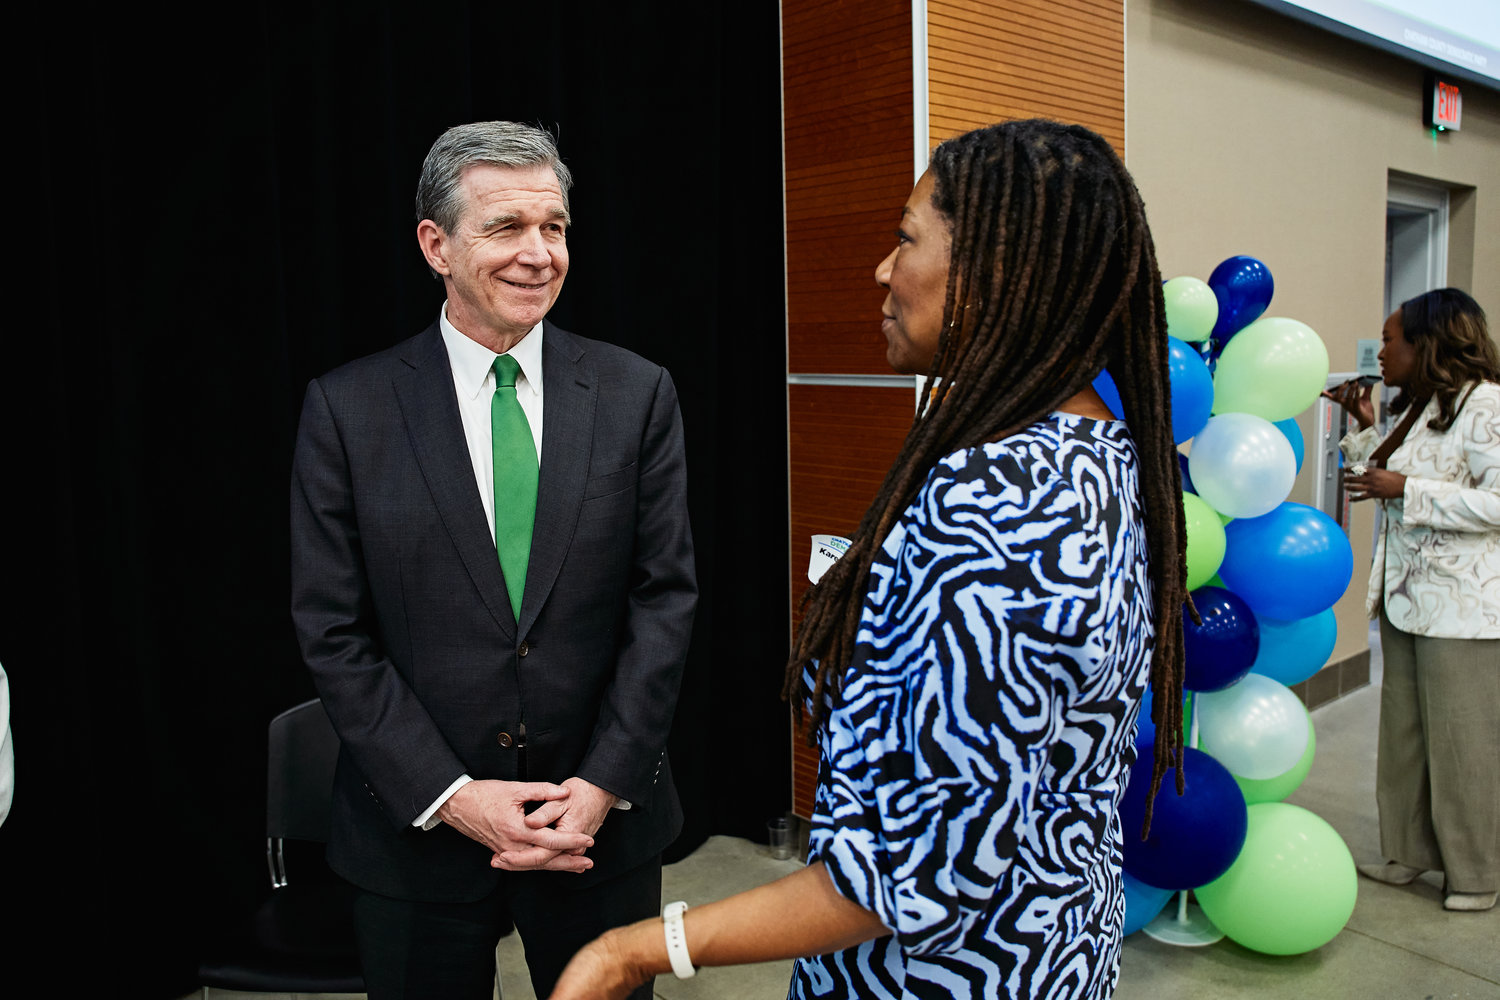 Gov. Roy Cooper greets Chatham County Board of Commissioners Chairperson Karen Howard.